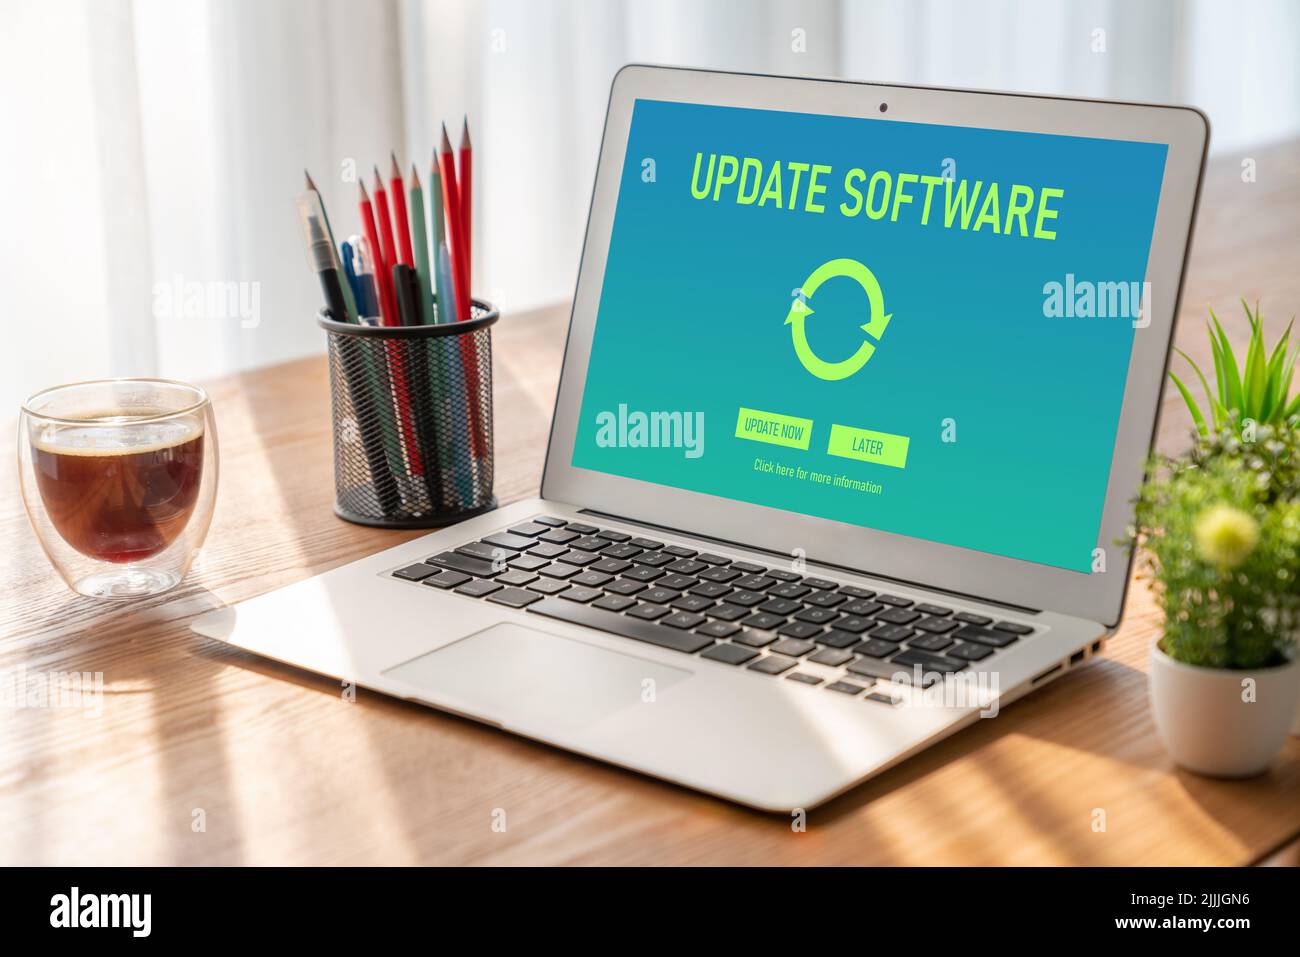 Software update on computer for modish version of device software upgrade Stock Photo